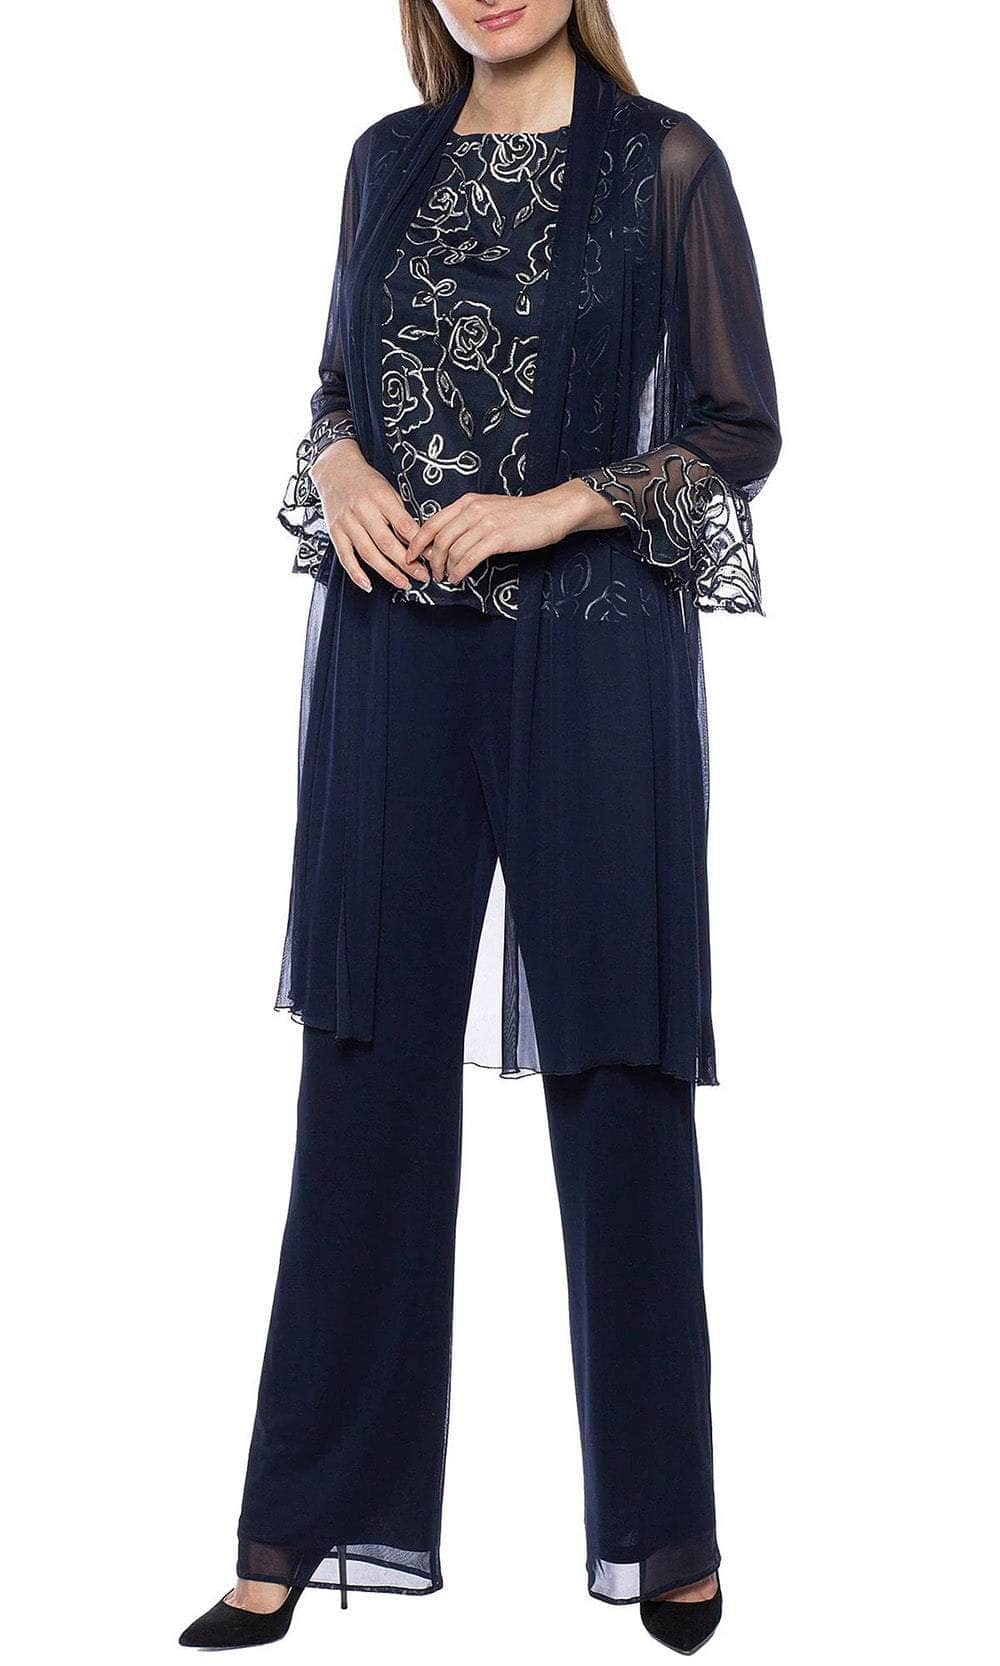 Marina 267679 - Embroidered Sleeveless Two-Piece Pant Set Special Occasion Dress 4 / Navy Ivory